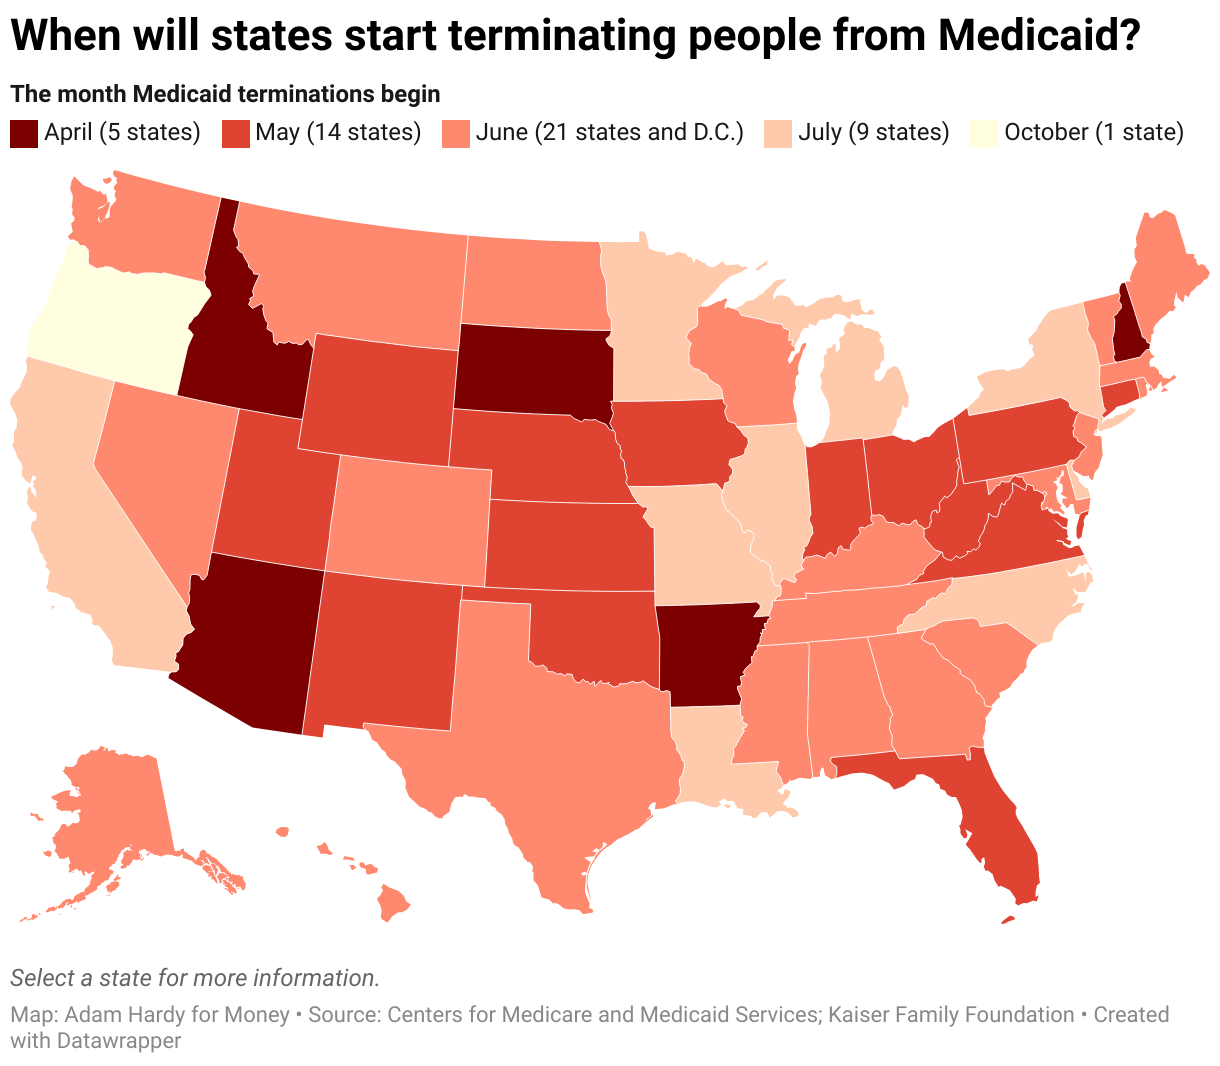 Kicked off Medicaid: Millions at risk as states trim rolls